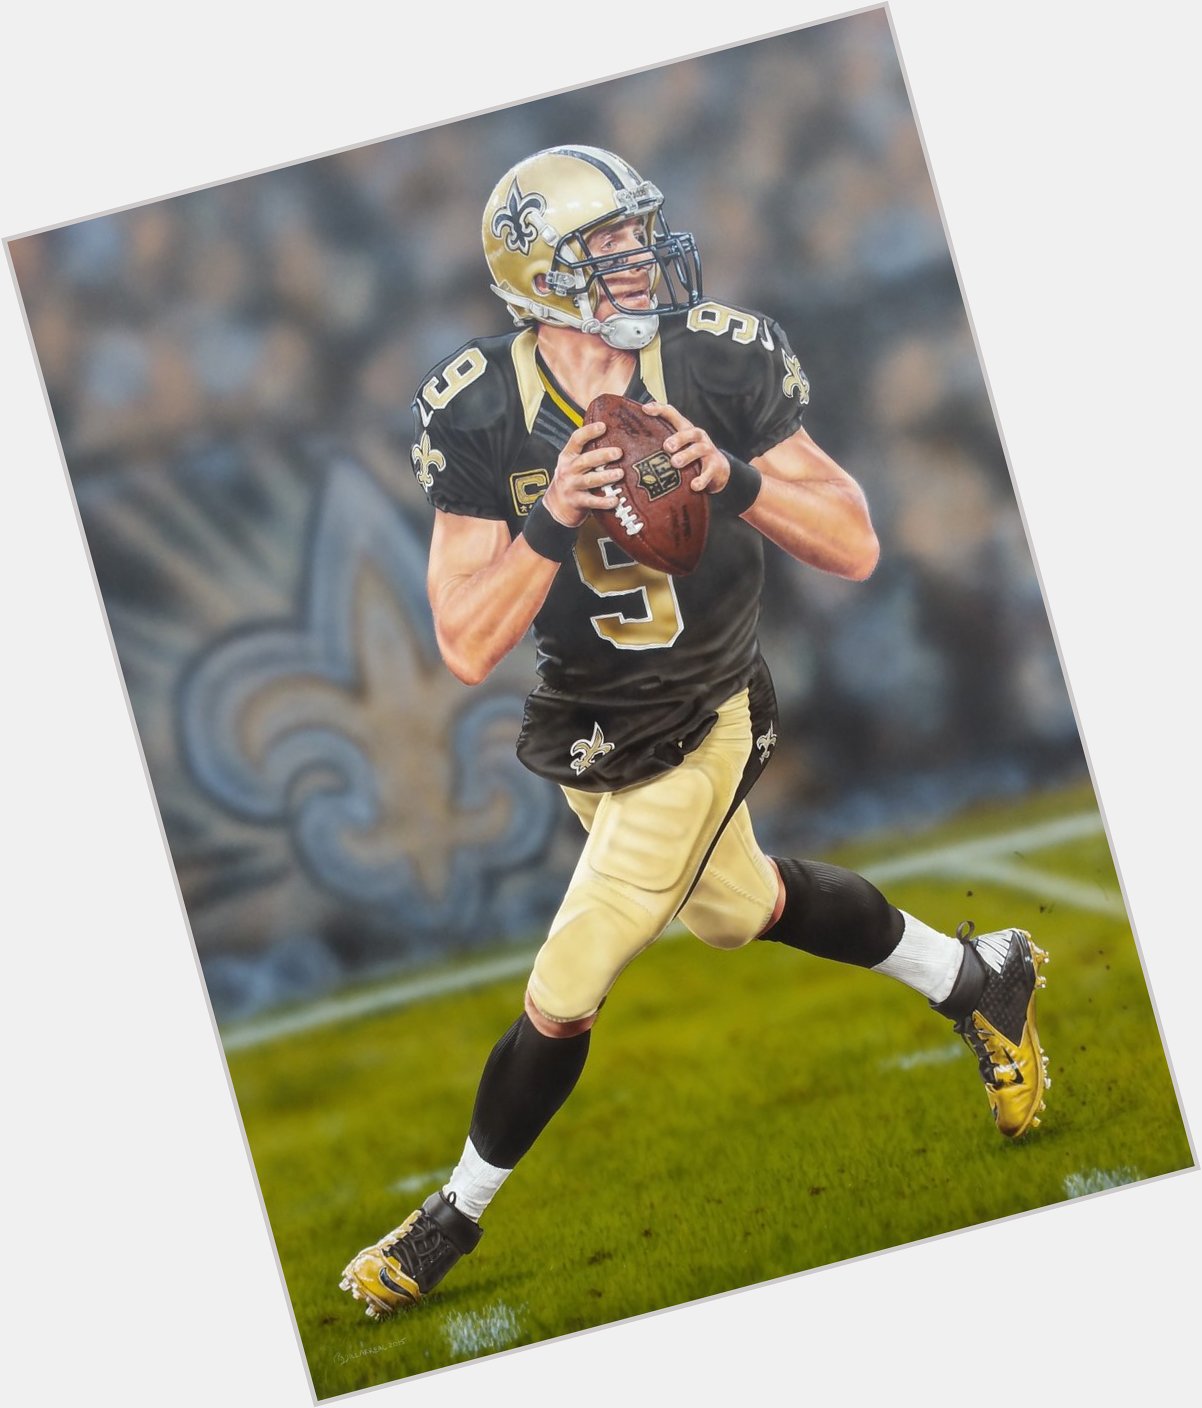 Happy Birthday to ! What was your favorite memory of Drew Brees?   